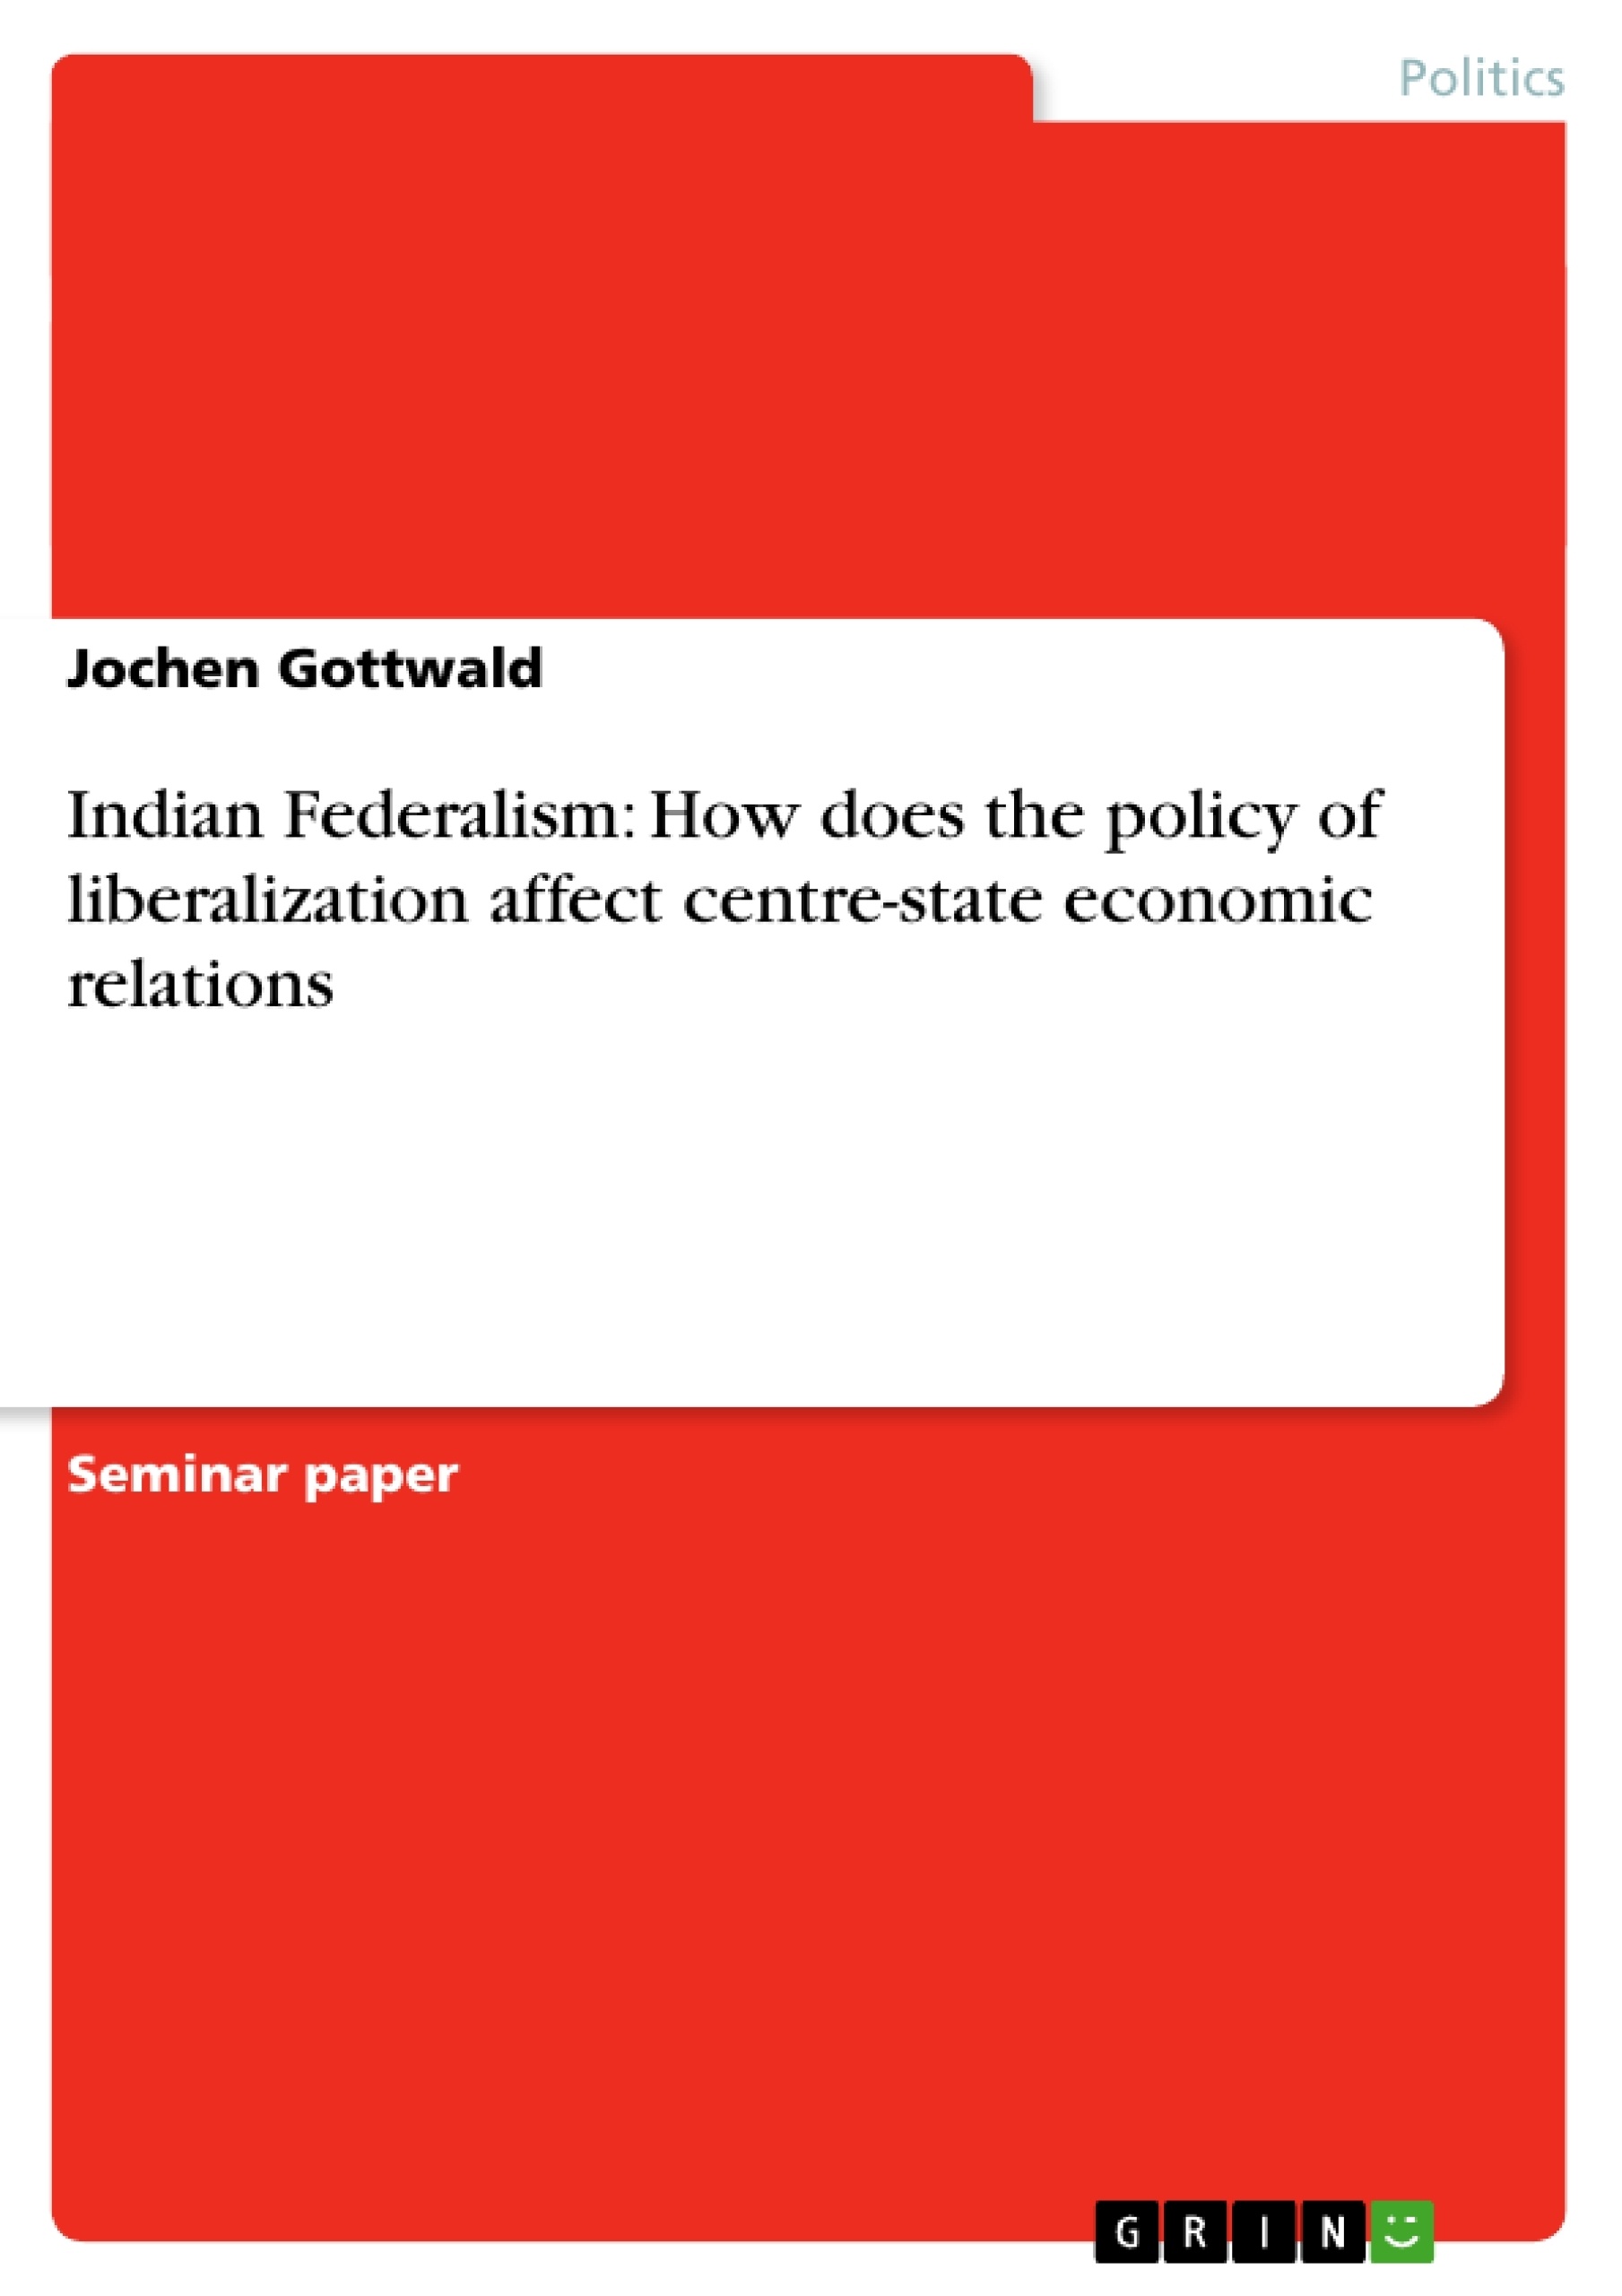 Título: Indian Federalism: How does the policy of liberalization affect centre-state economic relations